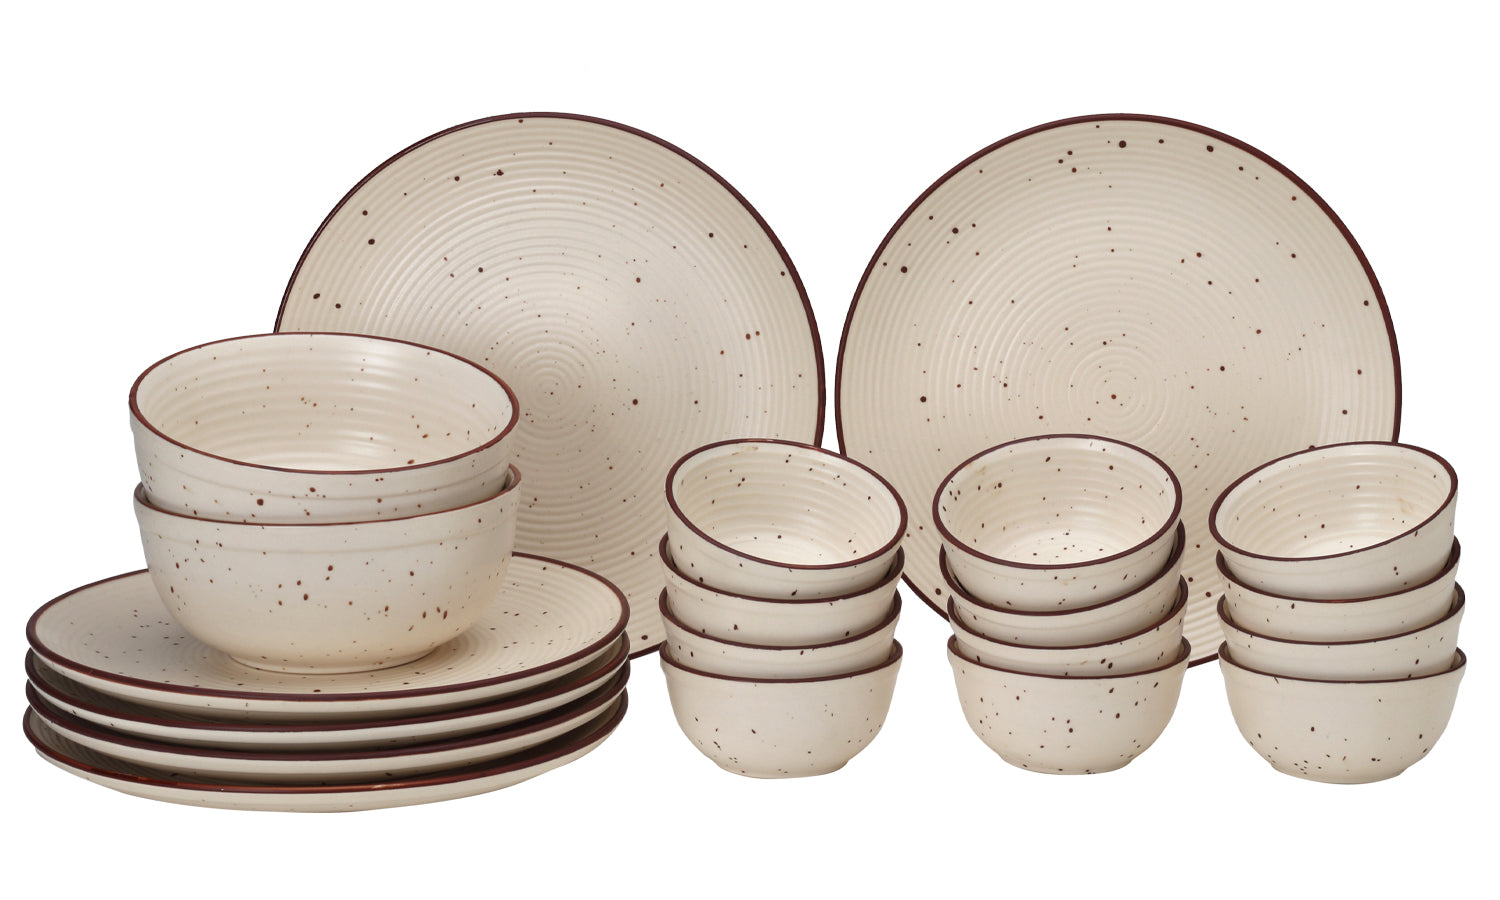 Frost Ceramic Dinner Set of 20 Pieces - 6 Dinner Plates,12 Bowl and 2 Serving Bowl